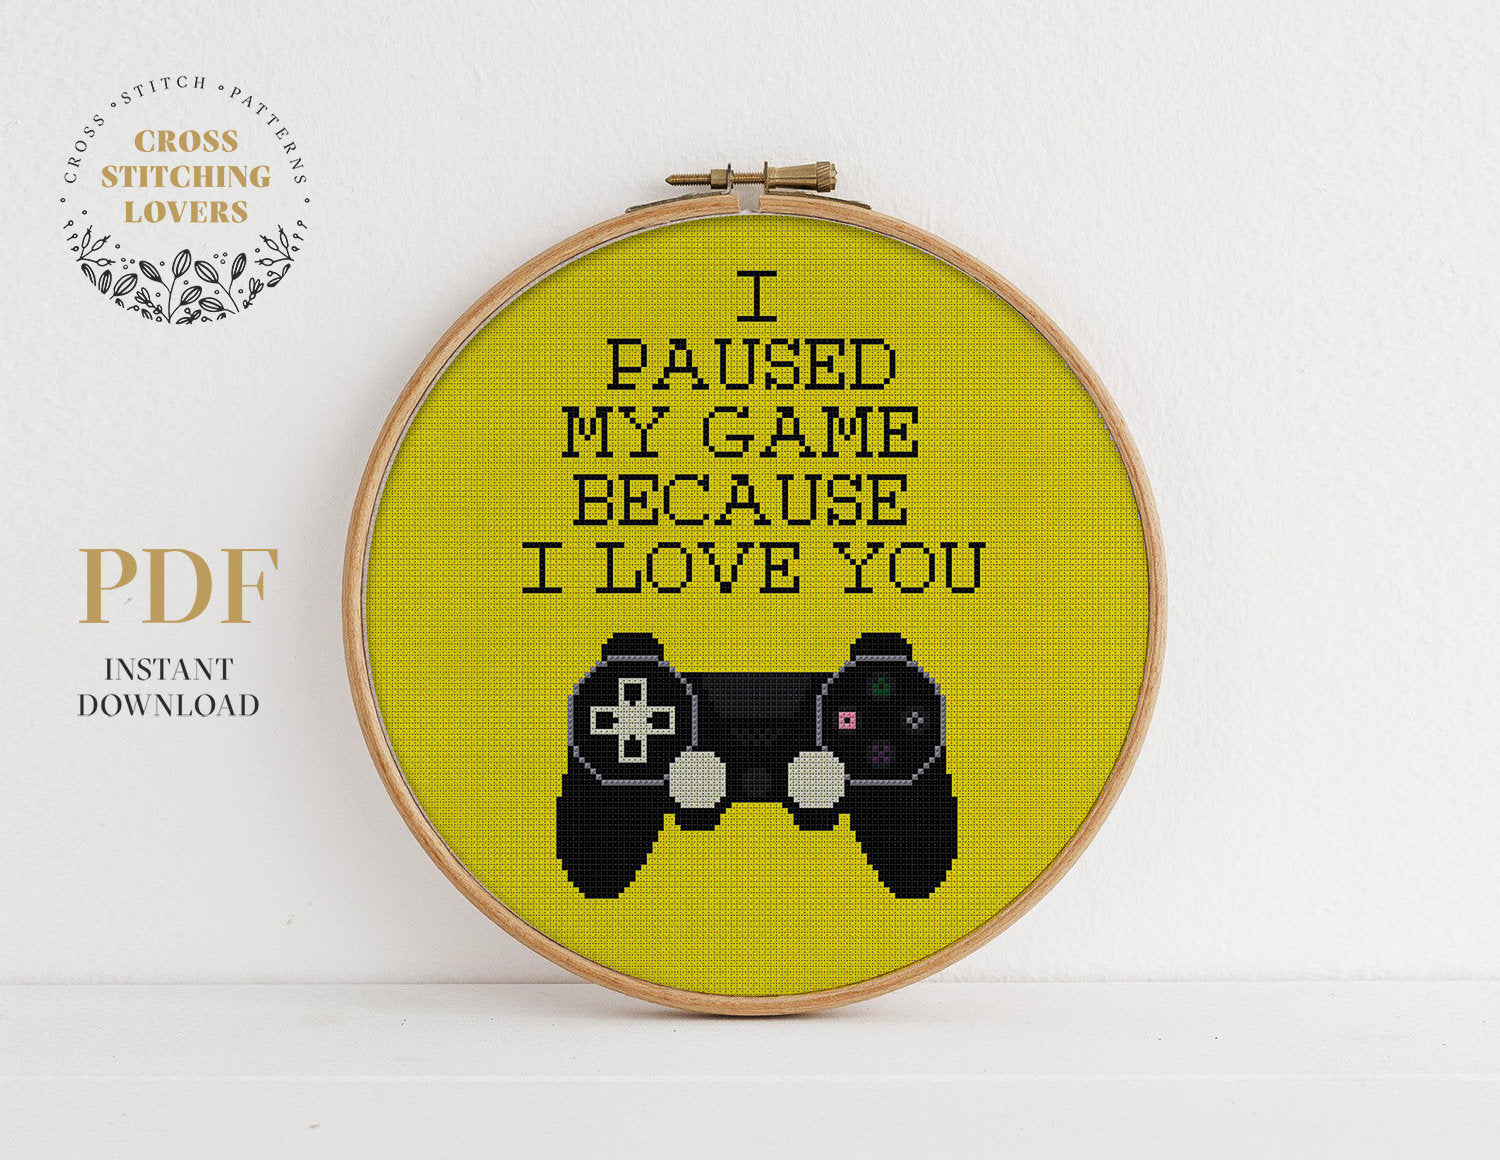 I paused my game because I love you - Cross stitch pattern